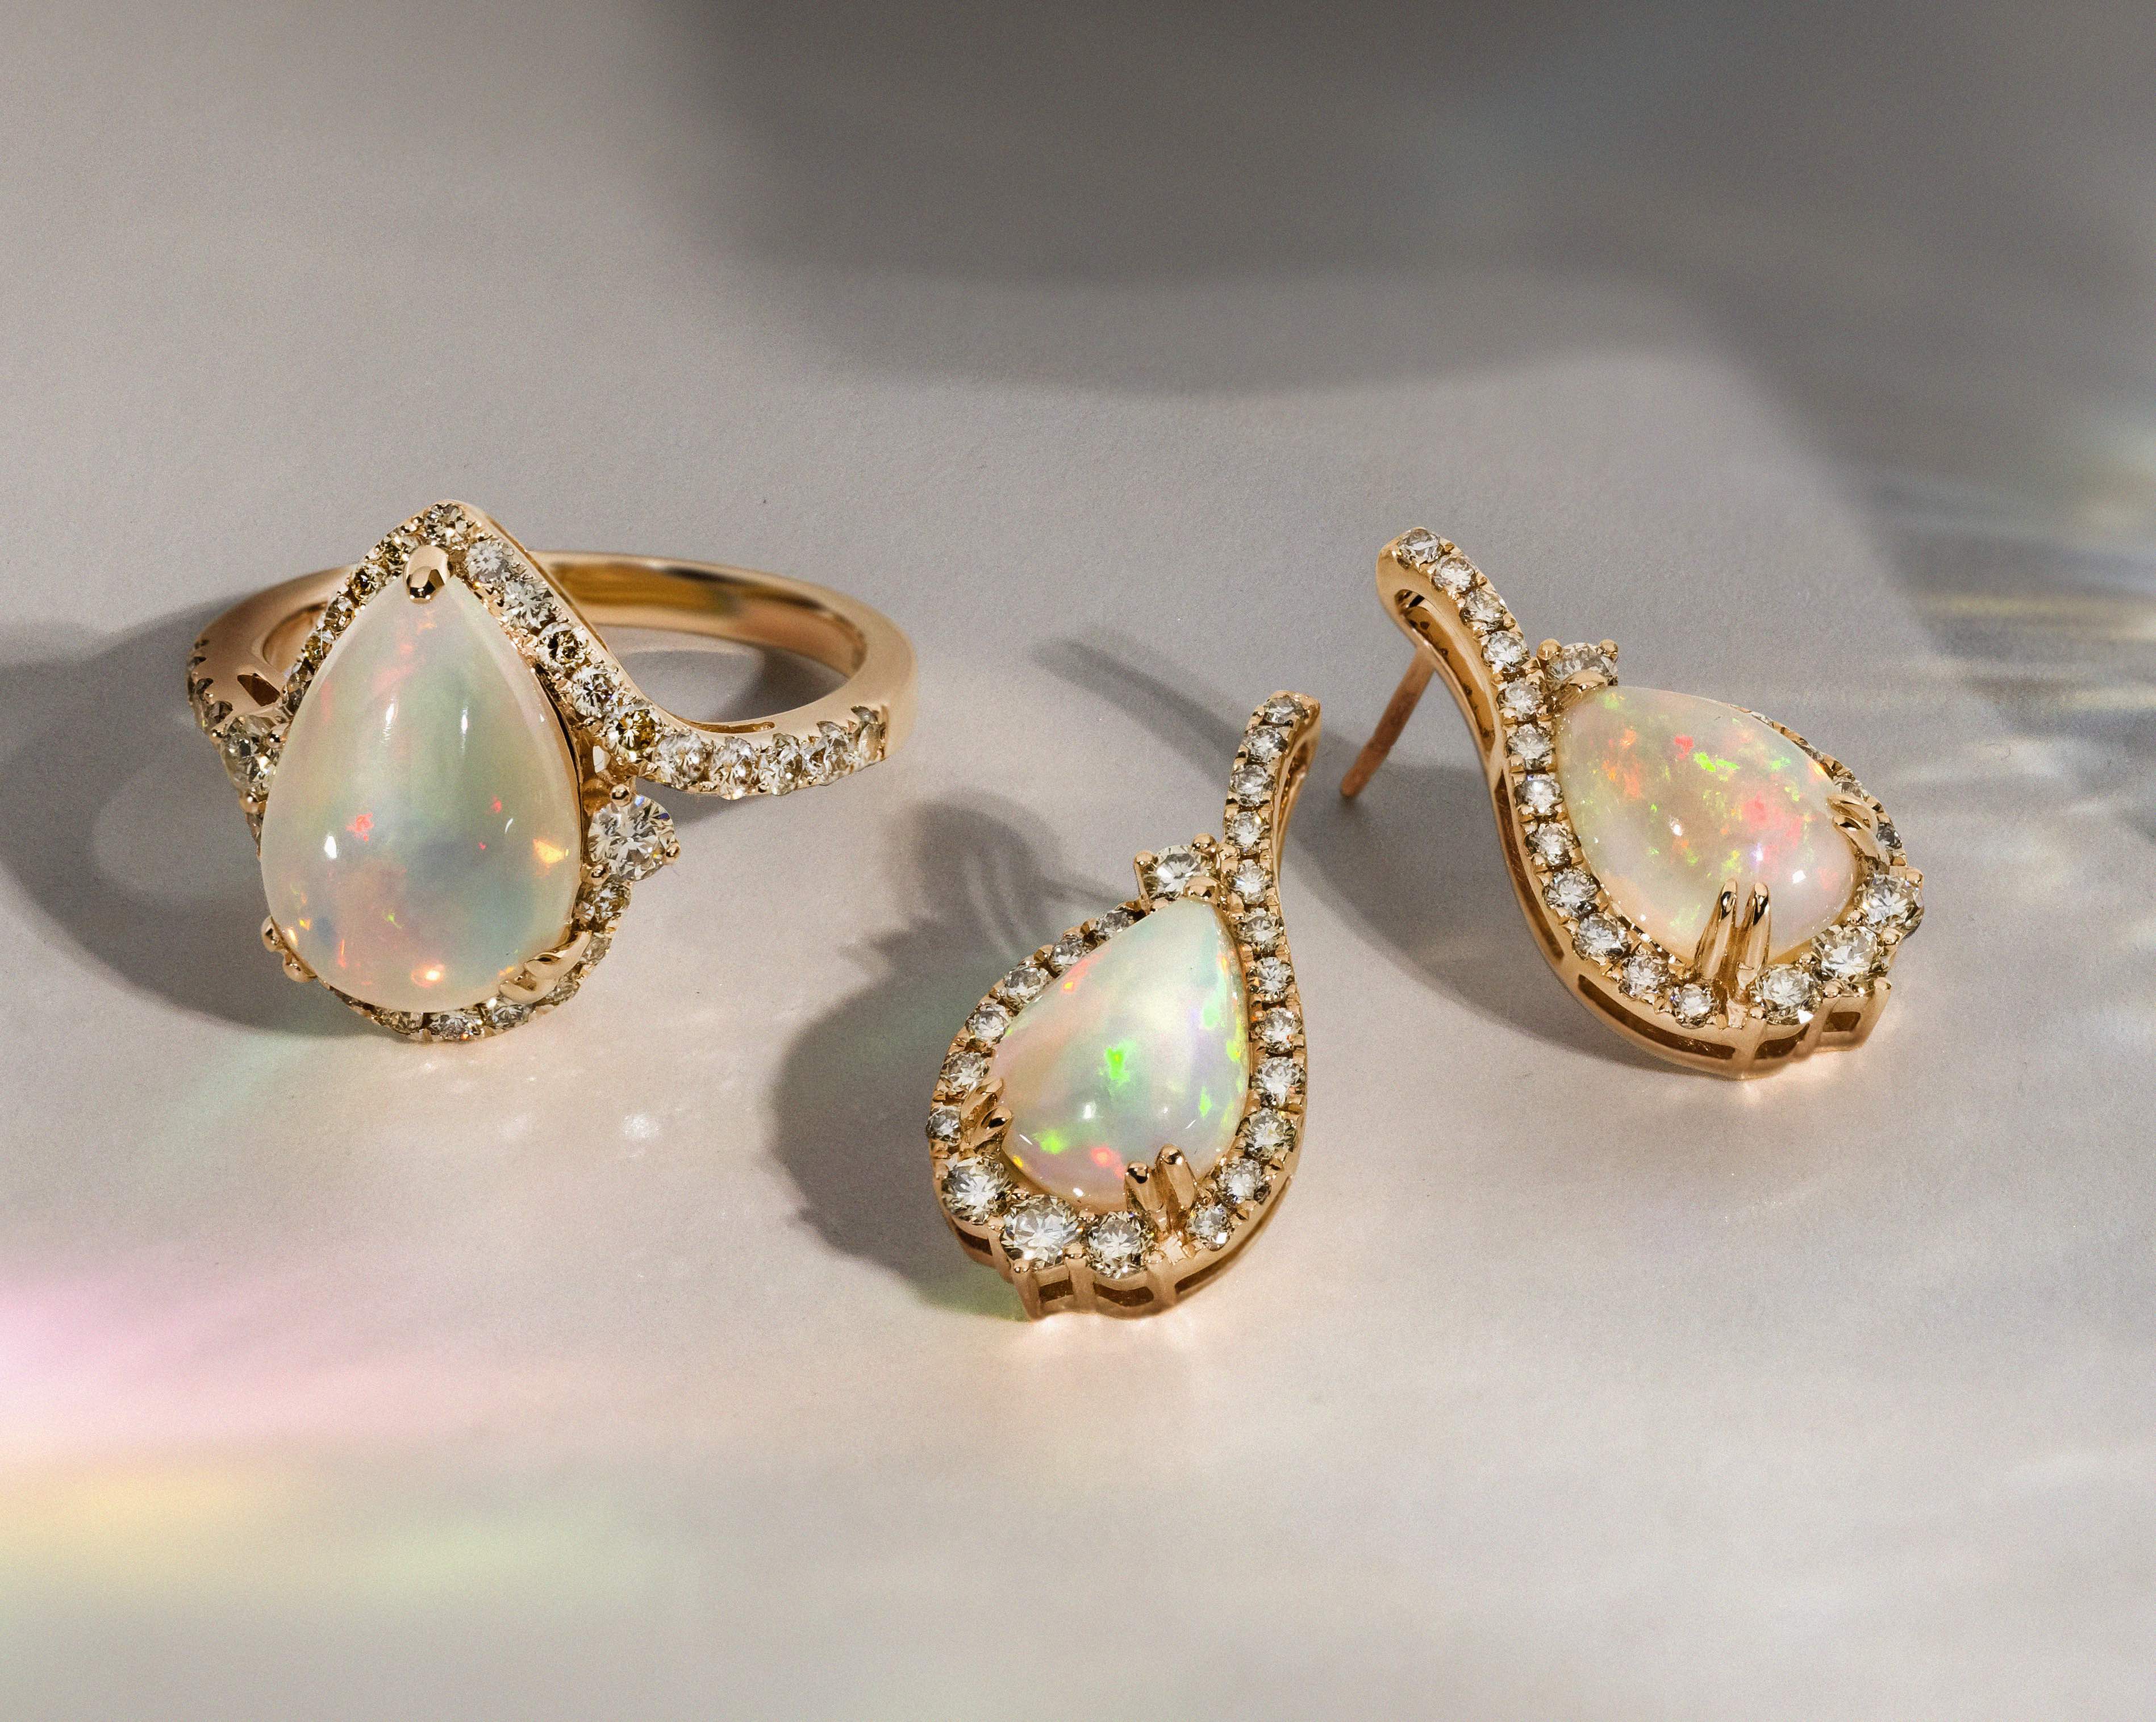 The History and Lore of the Opal